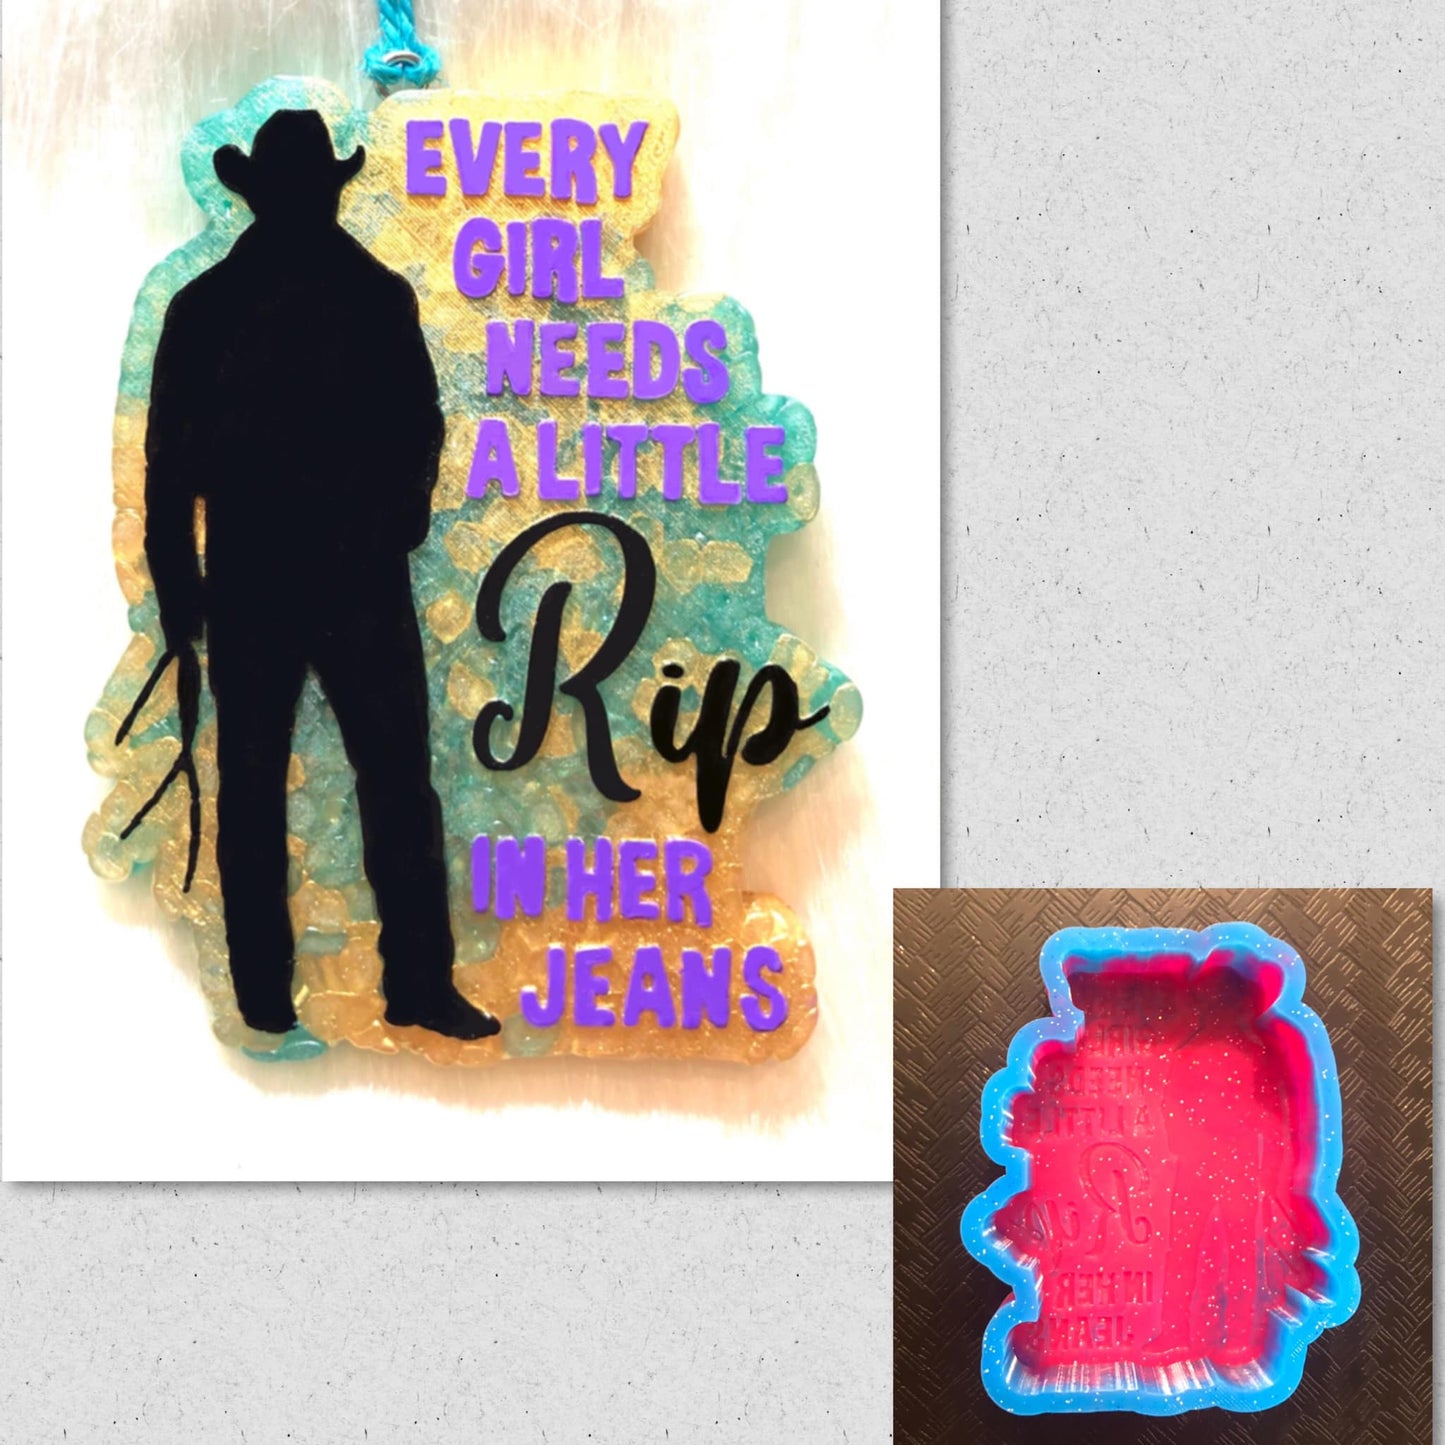 Every Girl Needs A Little RIP In Her Jeans Mold